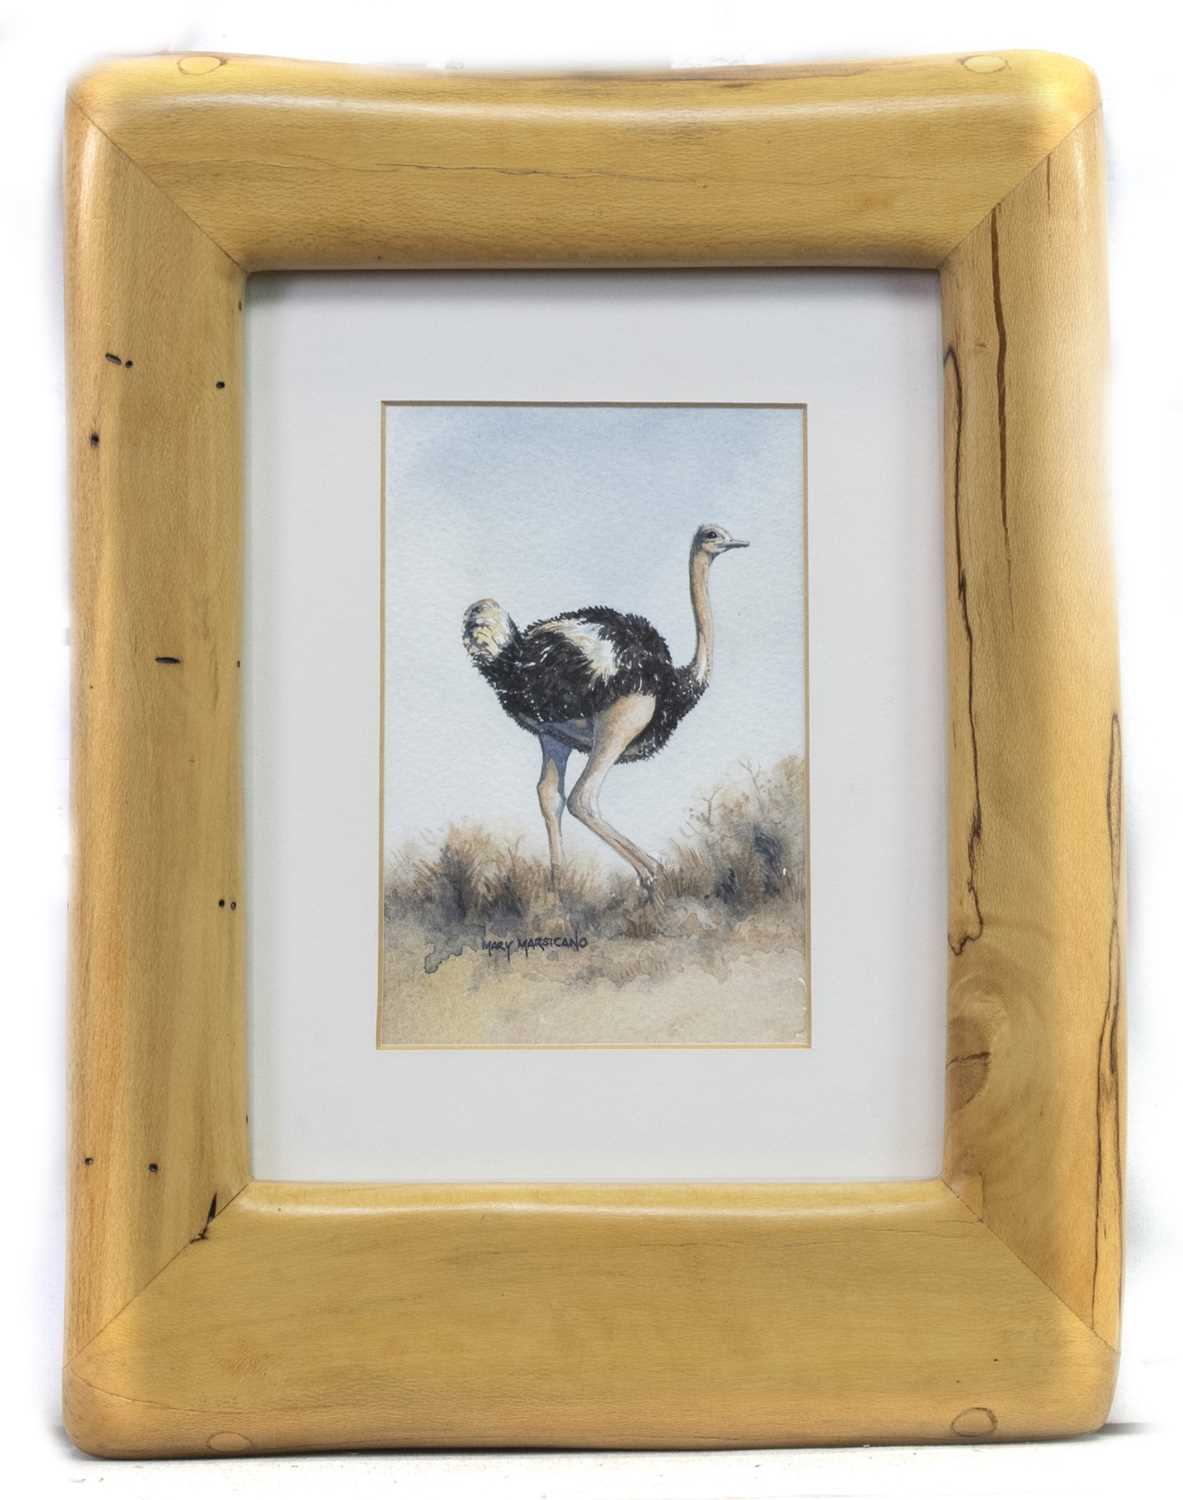 Lot 590 - SOUTH AFRICAN OSTRICH, A WATERCOLOUR BY MARY MARSICANO